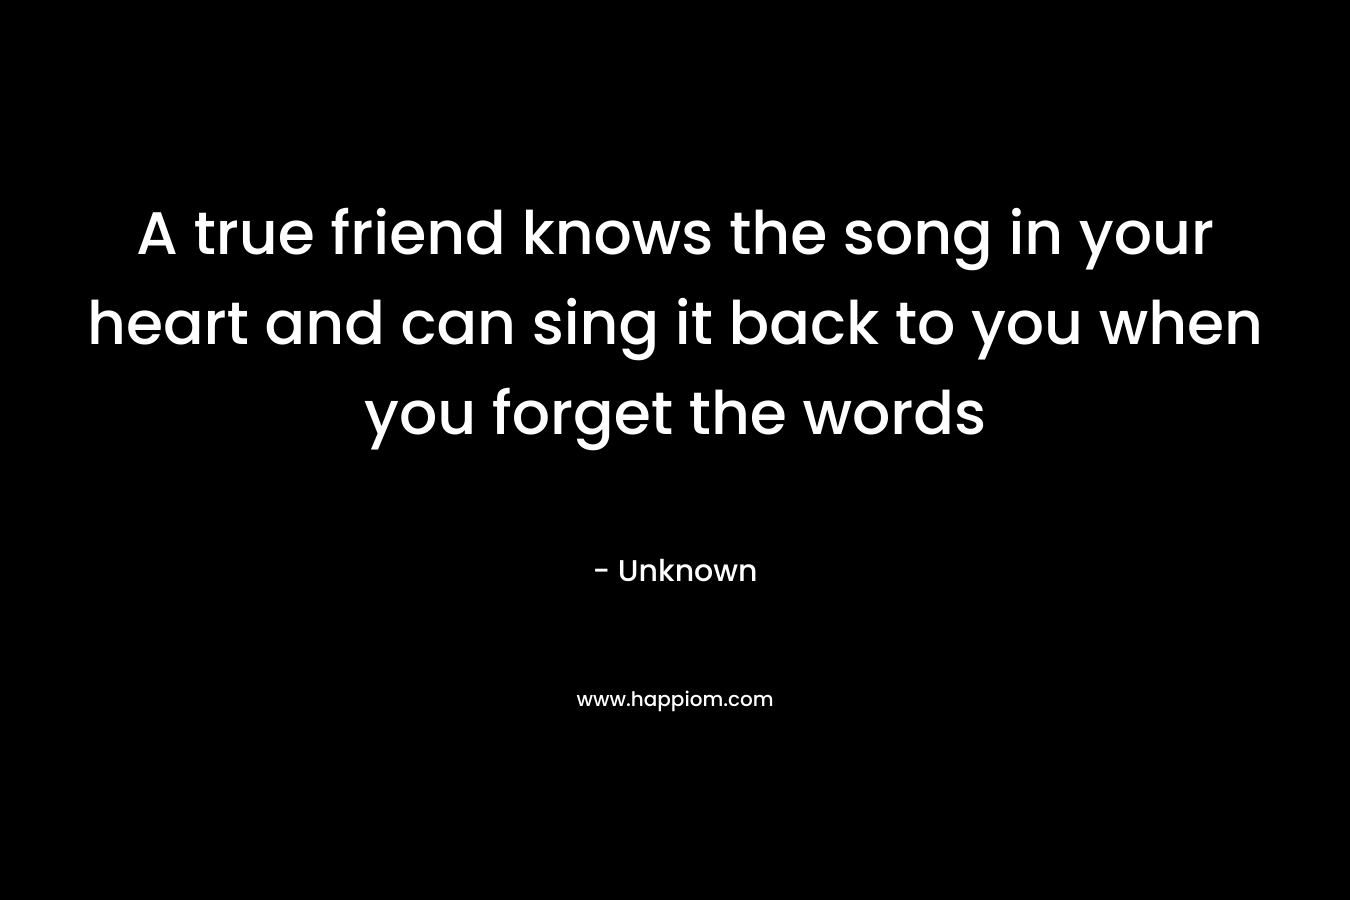 A true friend knows the song in your heart and can sing it back to you when you forget the words